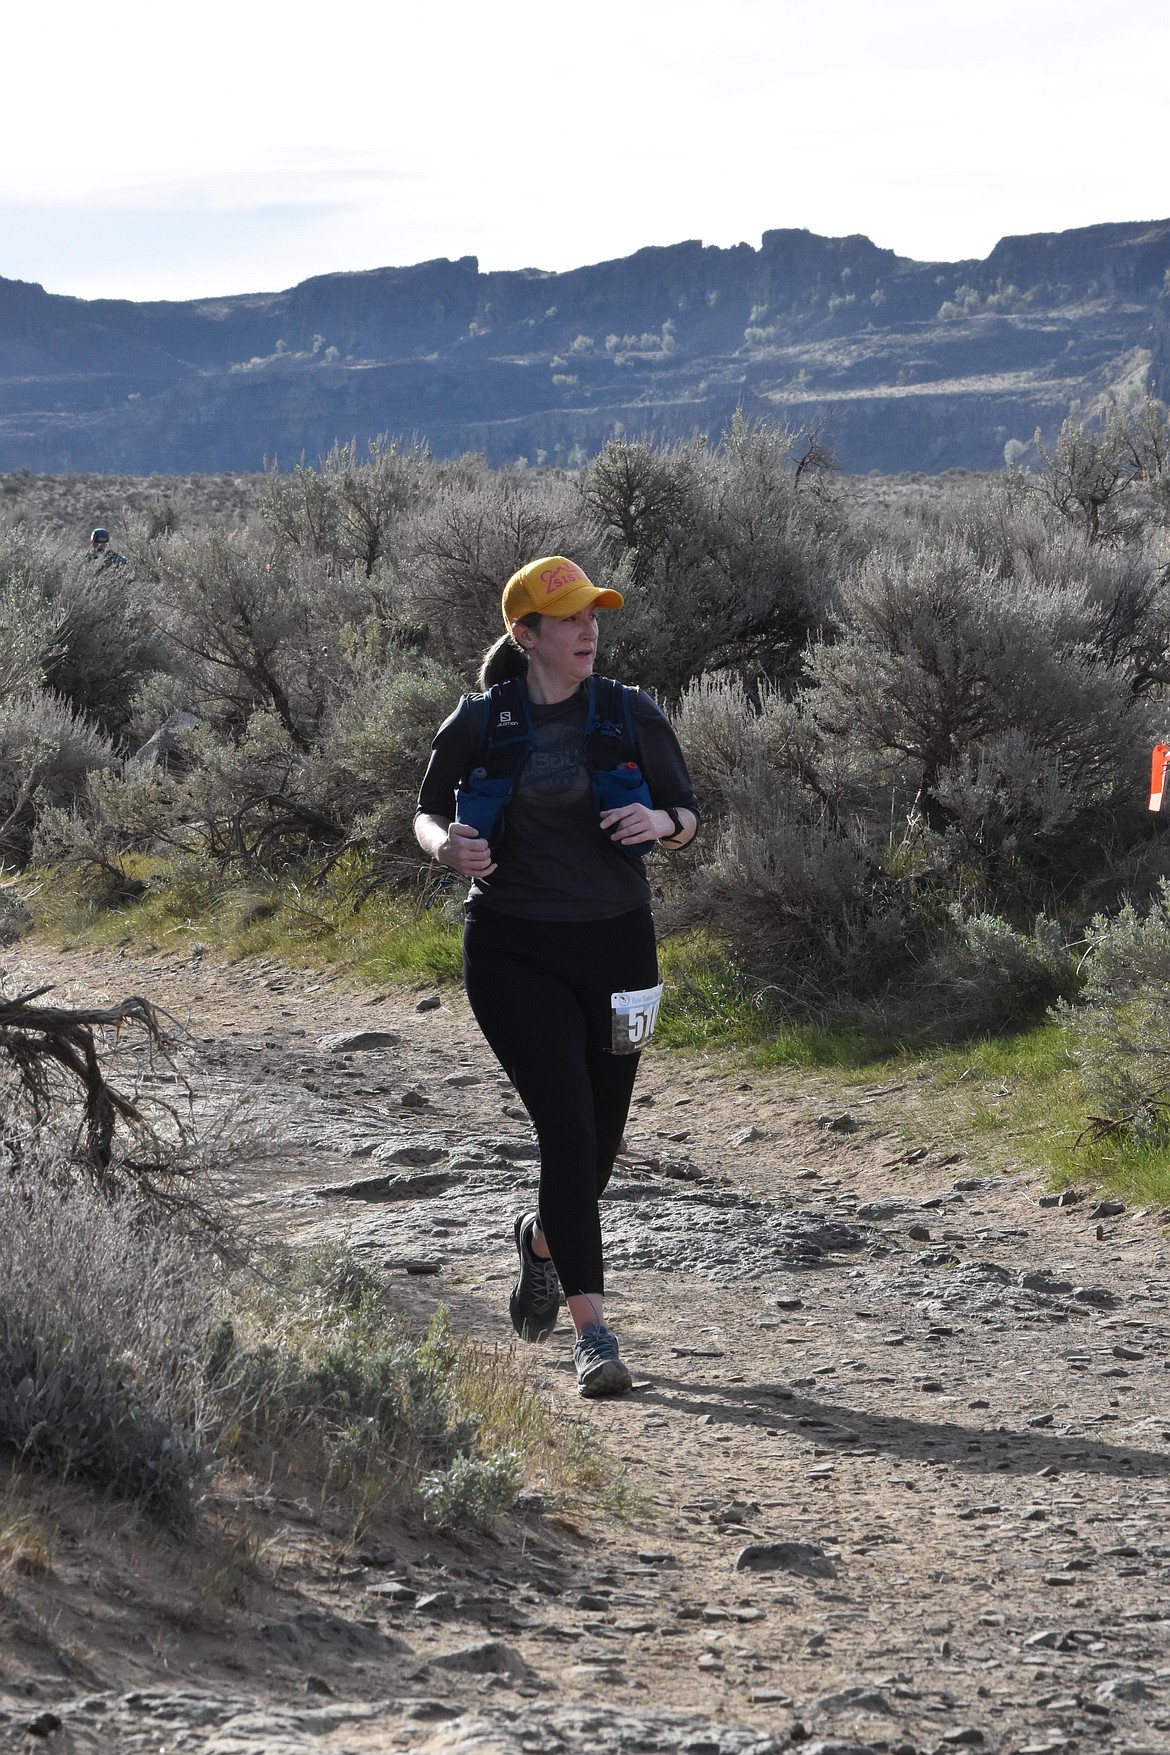 The sagebrush lined trails of the Ancient Lake Trail Run features loops through the Ancient Lakes area showcasing the desert landscape and waterfalls.